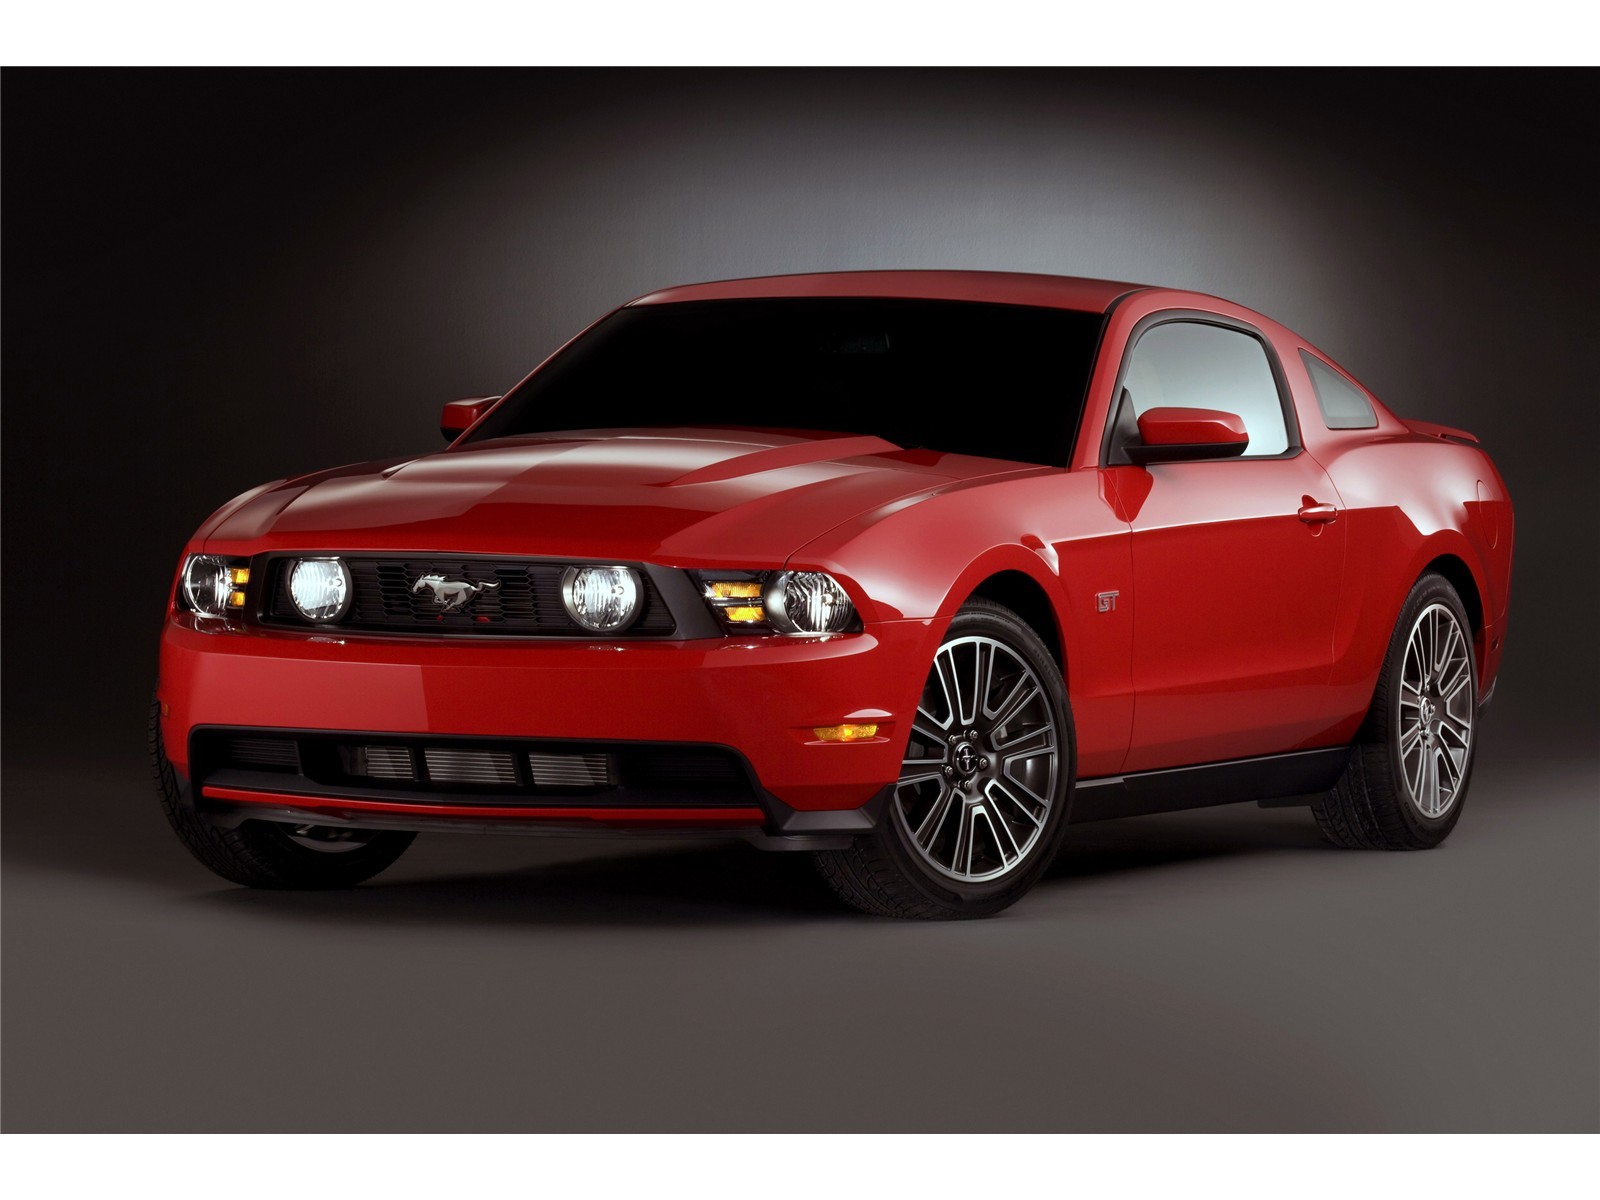 General 1600x1200 car red cars vehicle Ford Ford Mustang muscle cars American cars